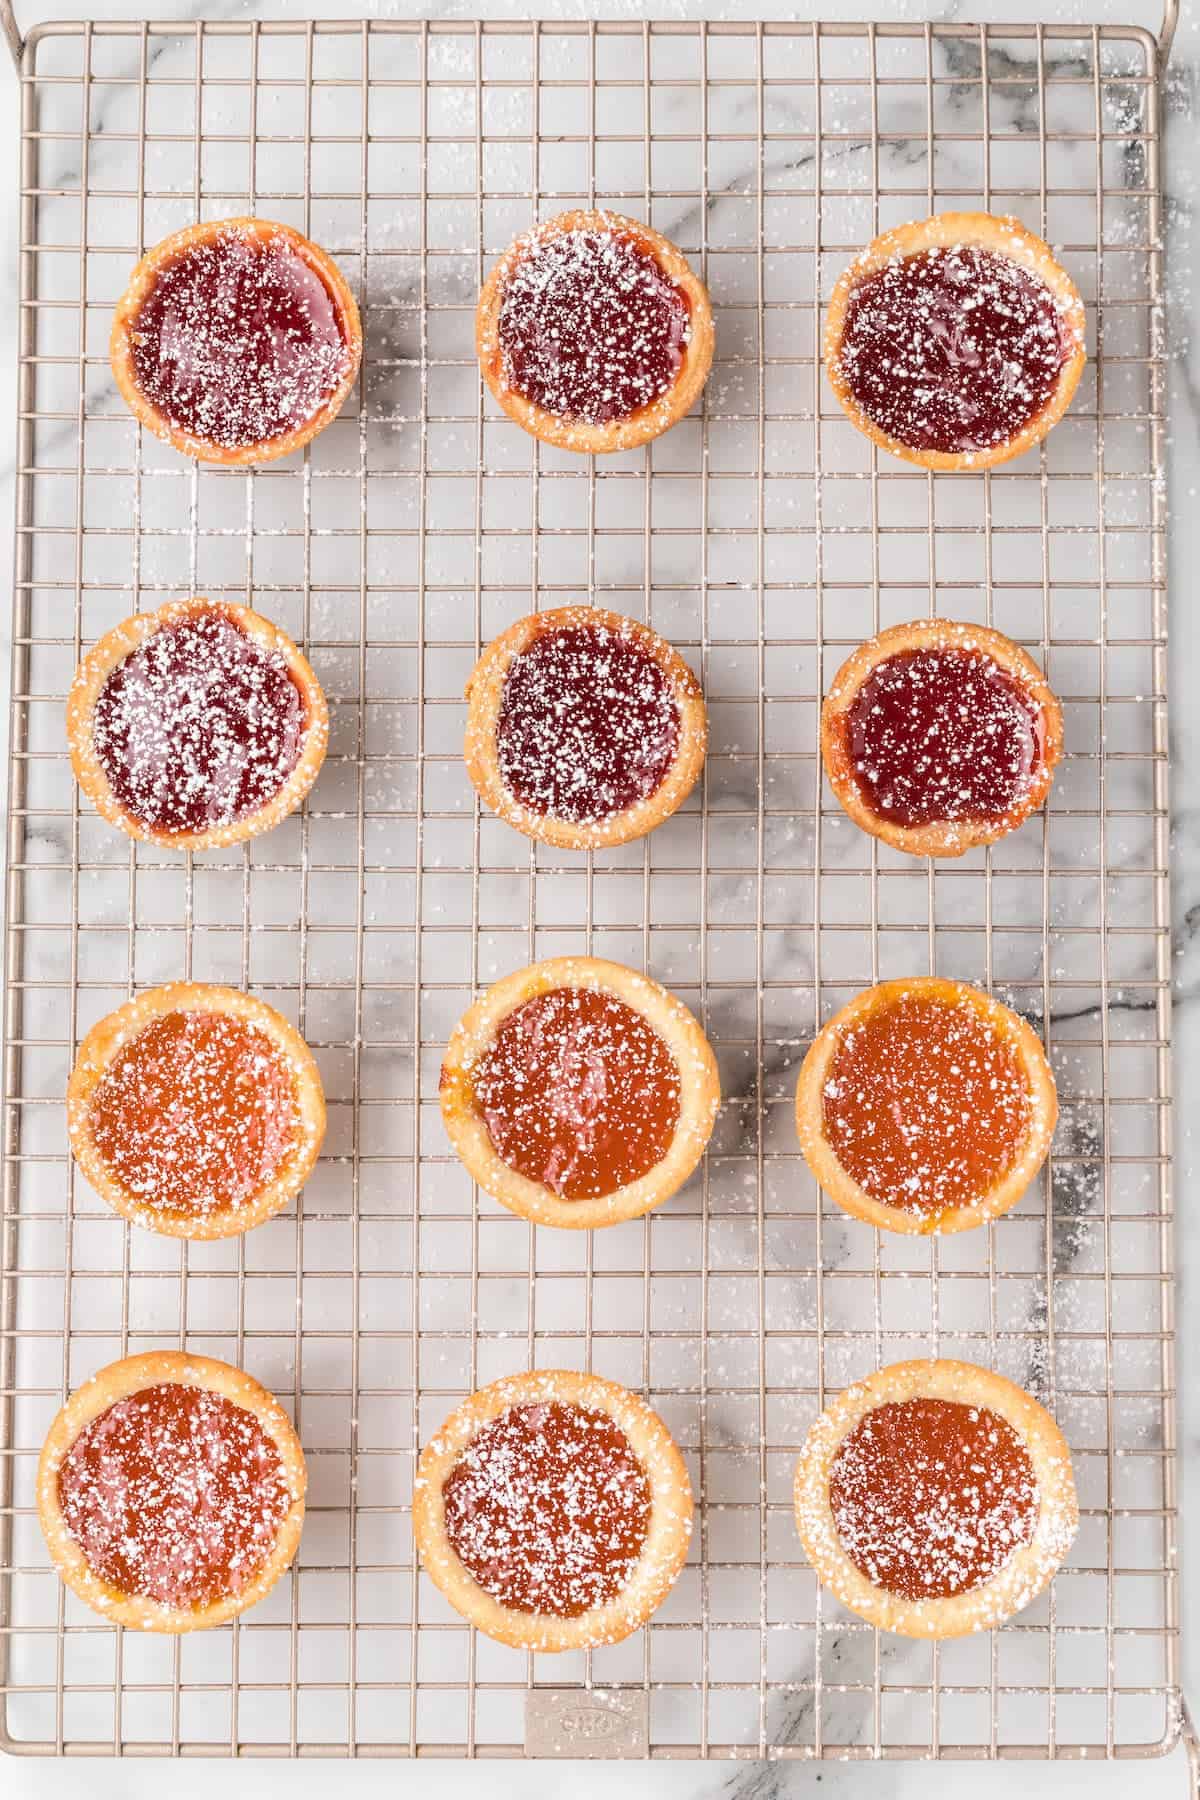 jam tarts lightly dusted with powdered sugar.